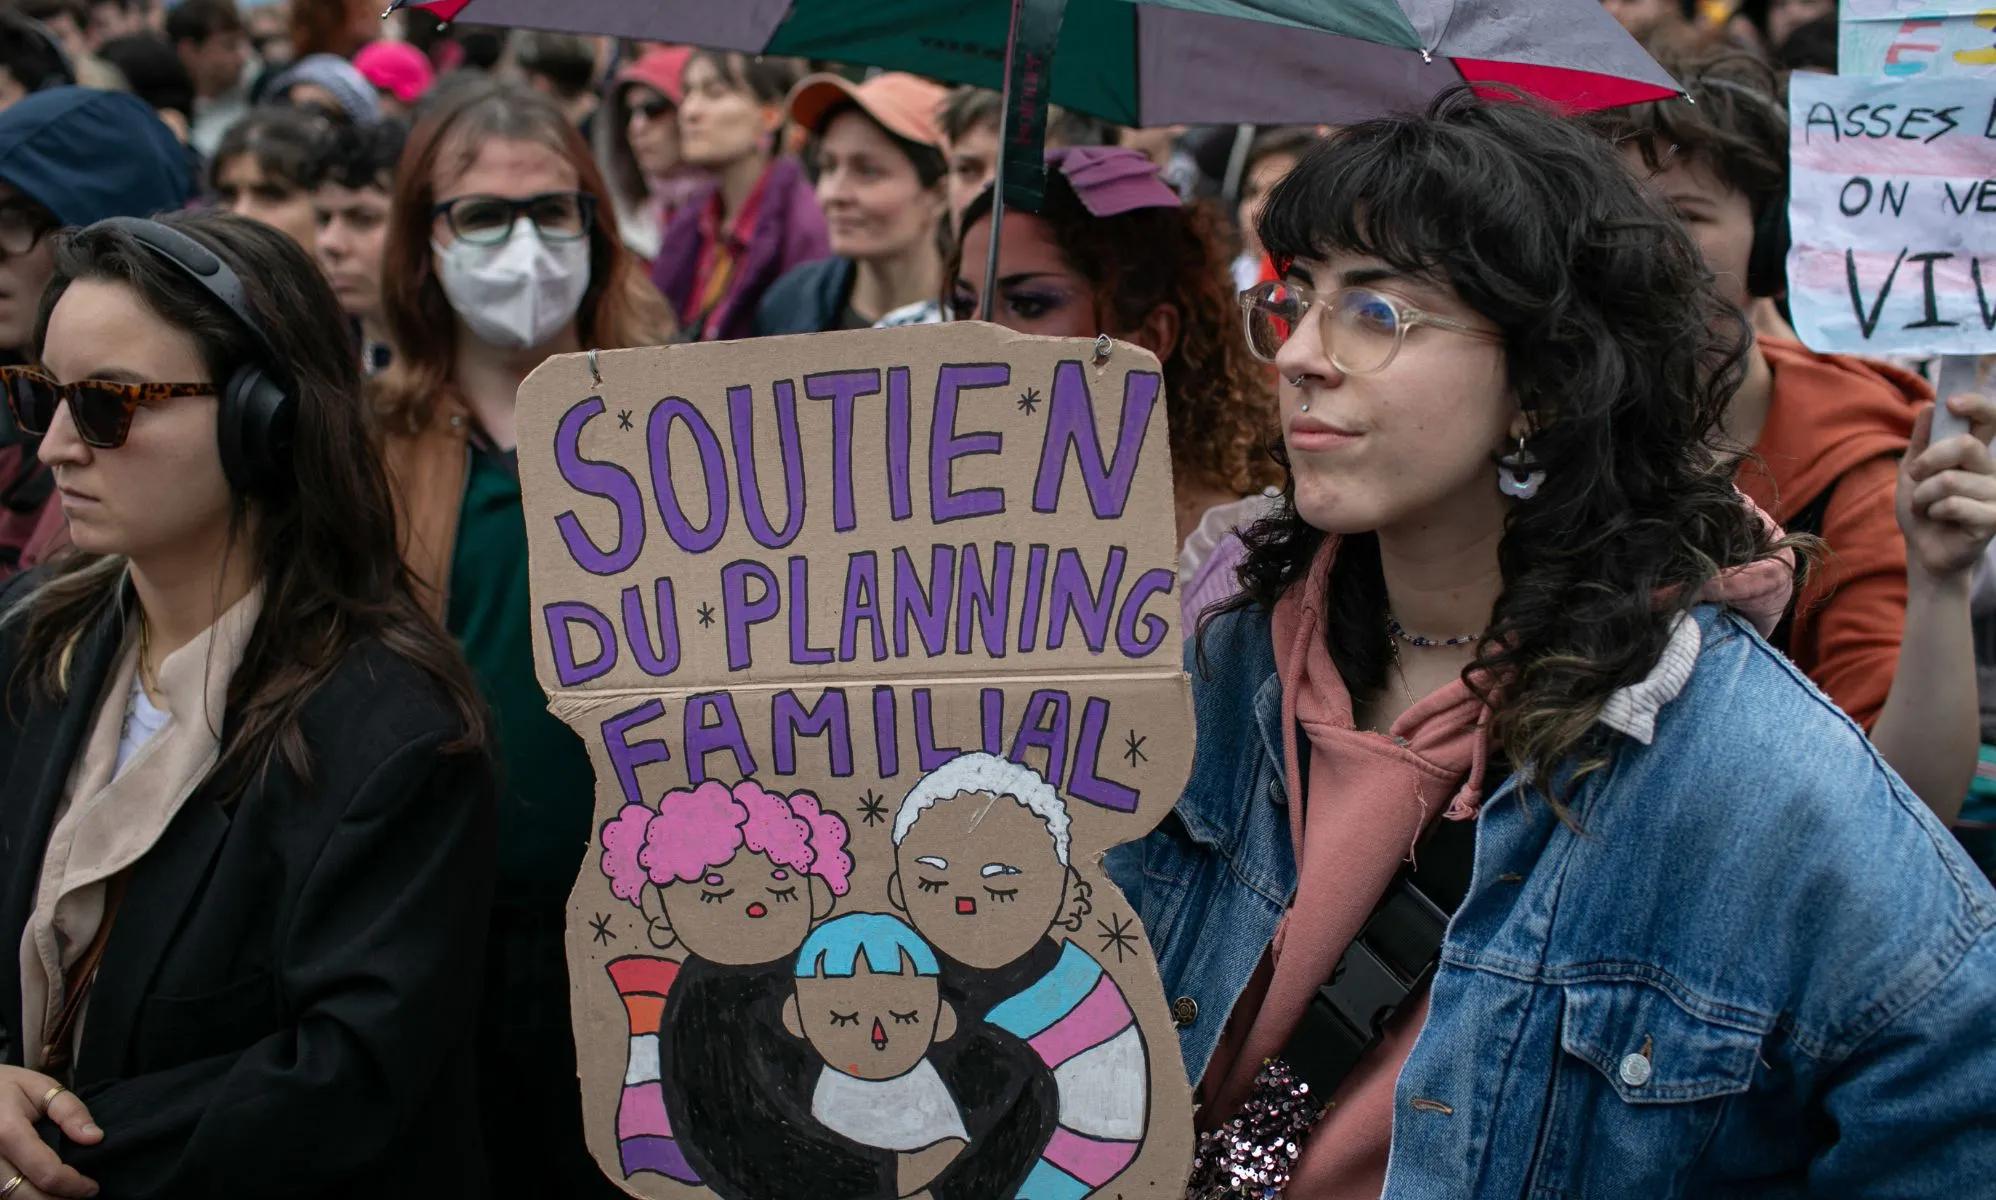 Thousands protest anti-trans bigotry in Paris and many other cities [Video]